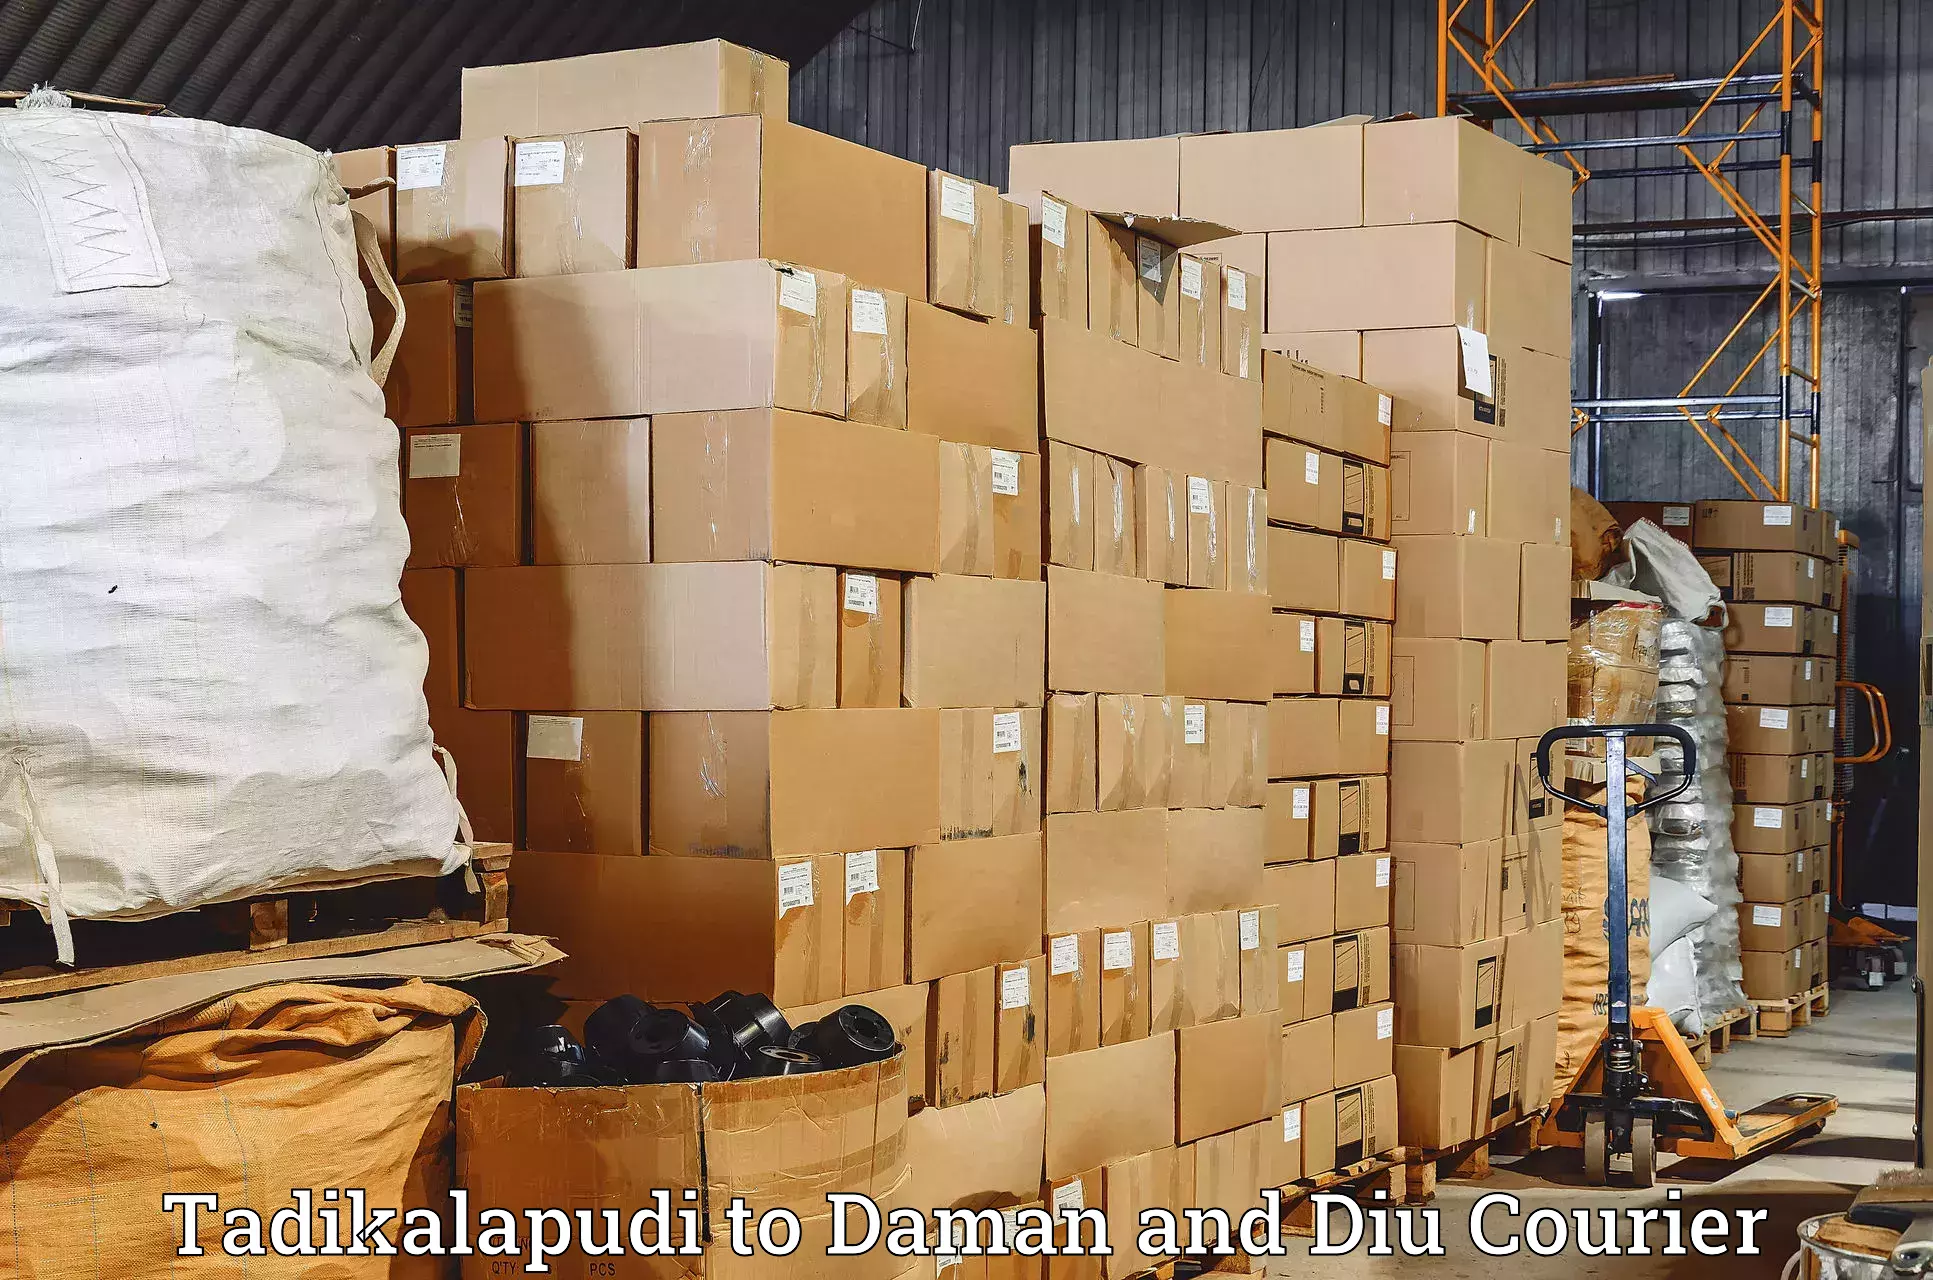 Reliable courier services in Tadikalapudi to Diu